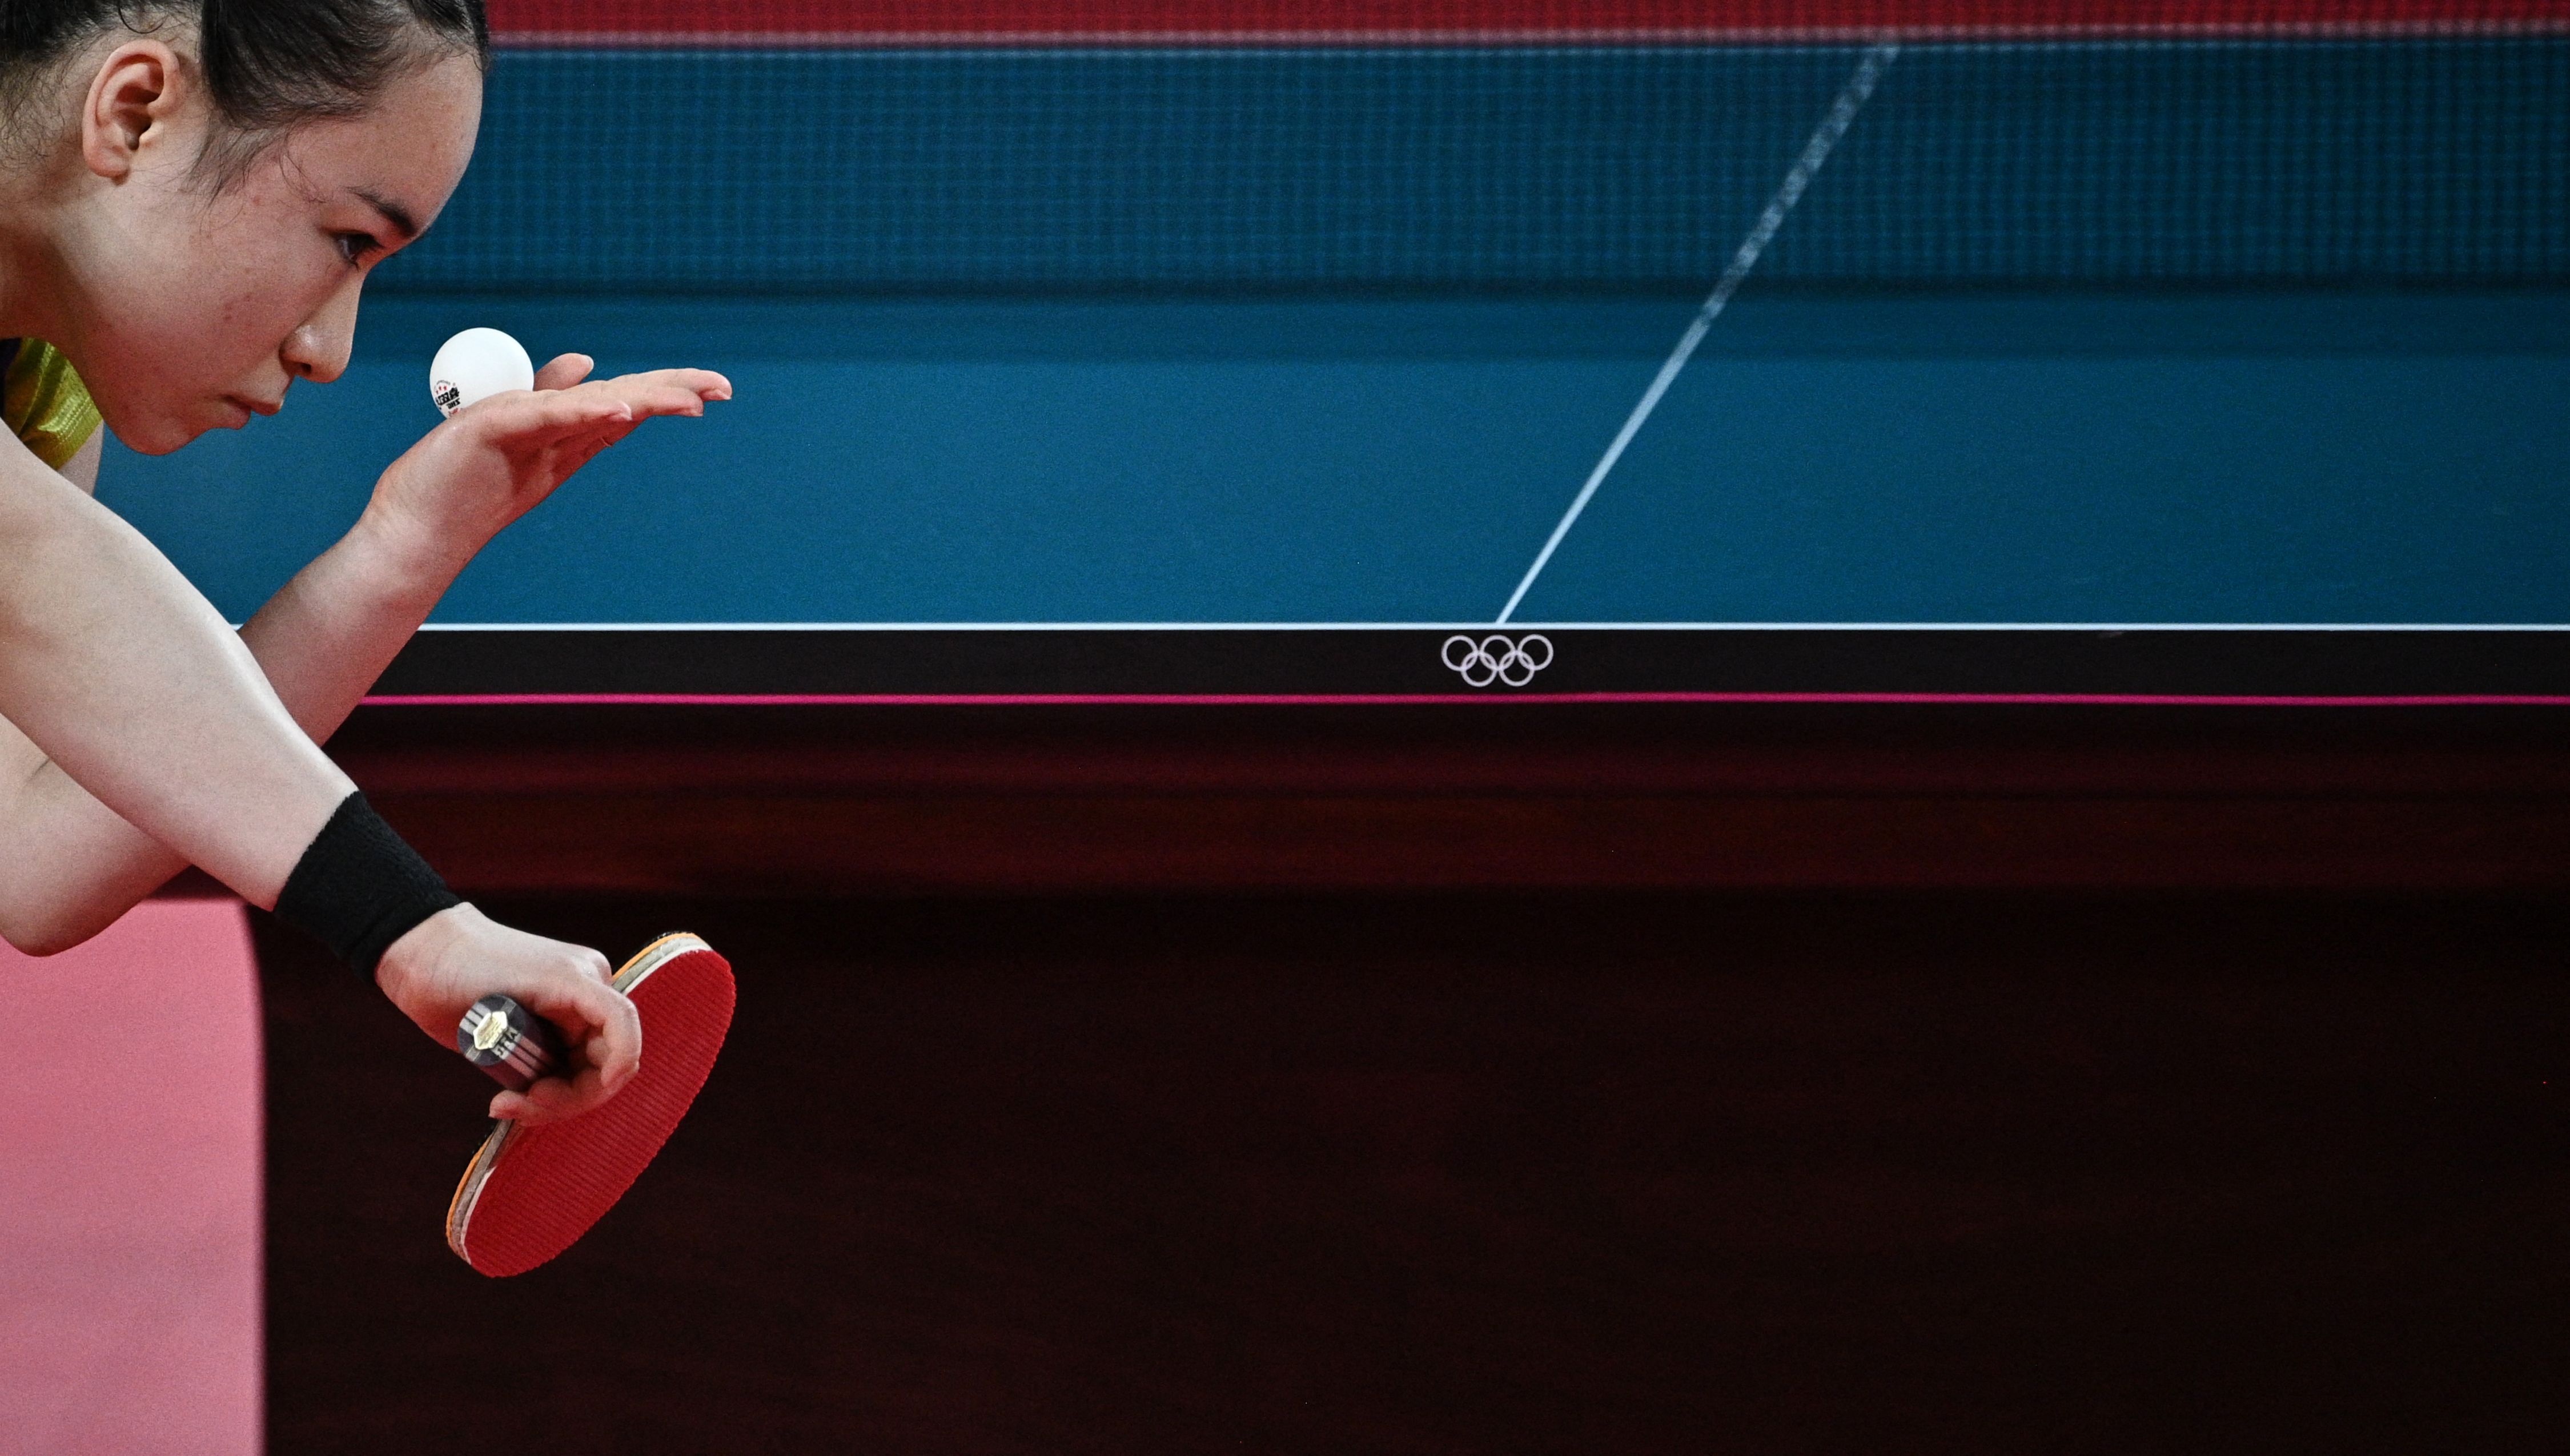 Japan's Mima Ito serves to China's Sun Yingsha during their women's singles semifinals table tennis match  during the Tokyo 2020 Olympic Games July 29